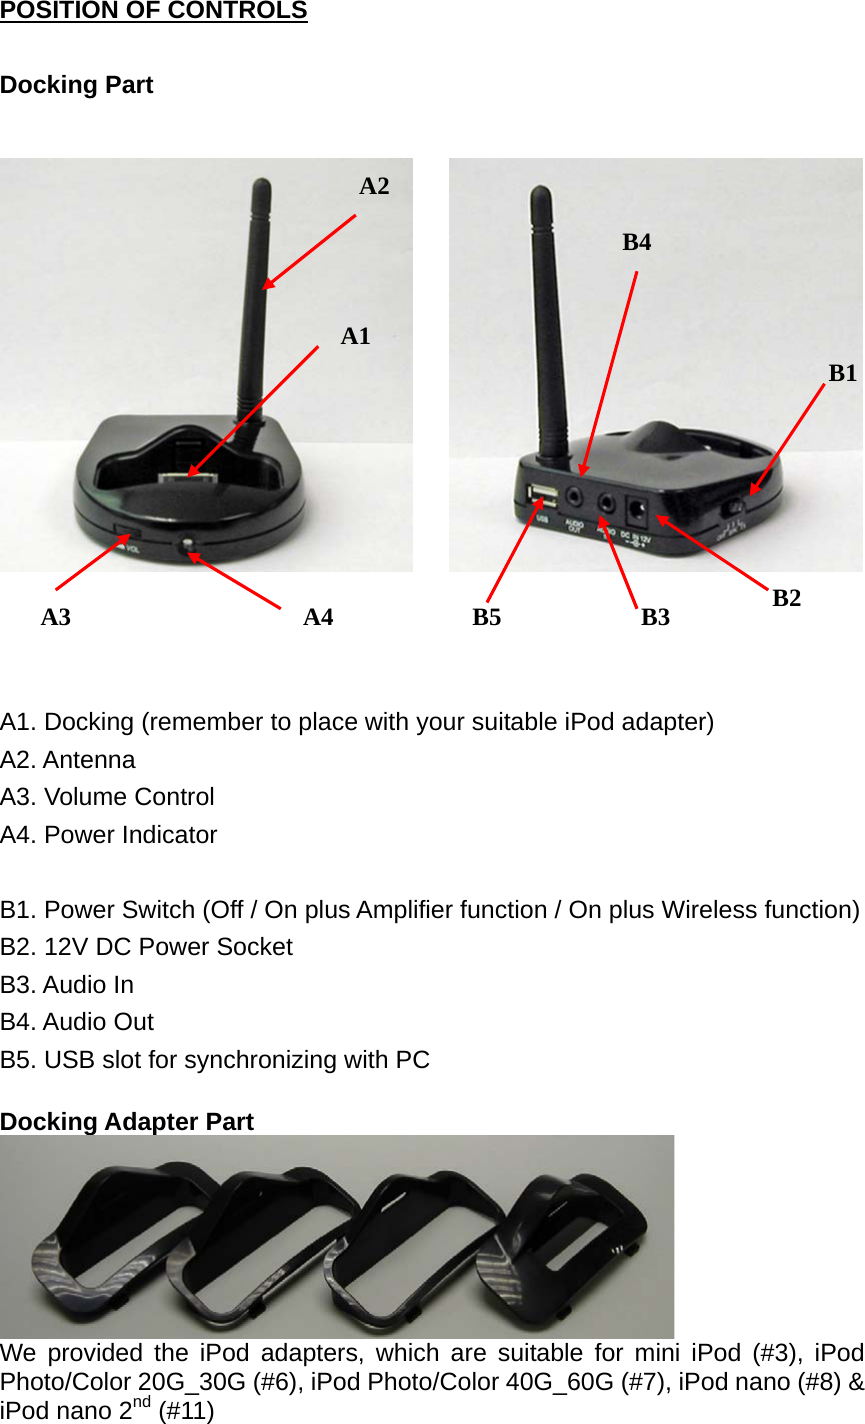 POSITION OF CONTROLS  Docking Part         A1. Docking (remember to place with your suitable iPod adapter) A2. Antenna A3. Volume Control A4. Power Indicator  B1. Power Switch (Off / On plus Amplifier function / On plus Wireless function) B2. 12V DC Power Socket B3. Audio In B4. Audio Out B5. USB slot for synchronizing with PC  Docking Adapter Part  We provided the iPod adapters, which are suitable for mini iPod (#3), iPod Photo/Color 20G_30G (#6), iPod Photo/Color 40G_60G (#7), iPod nano (#8) &amp; iPod nano 2nd (#11) A4 A3  B3 B4 B5  B2B1 A2 A1 